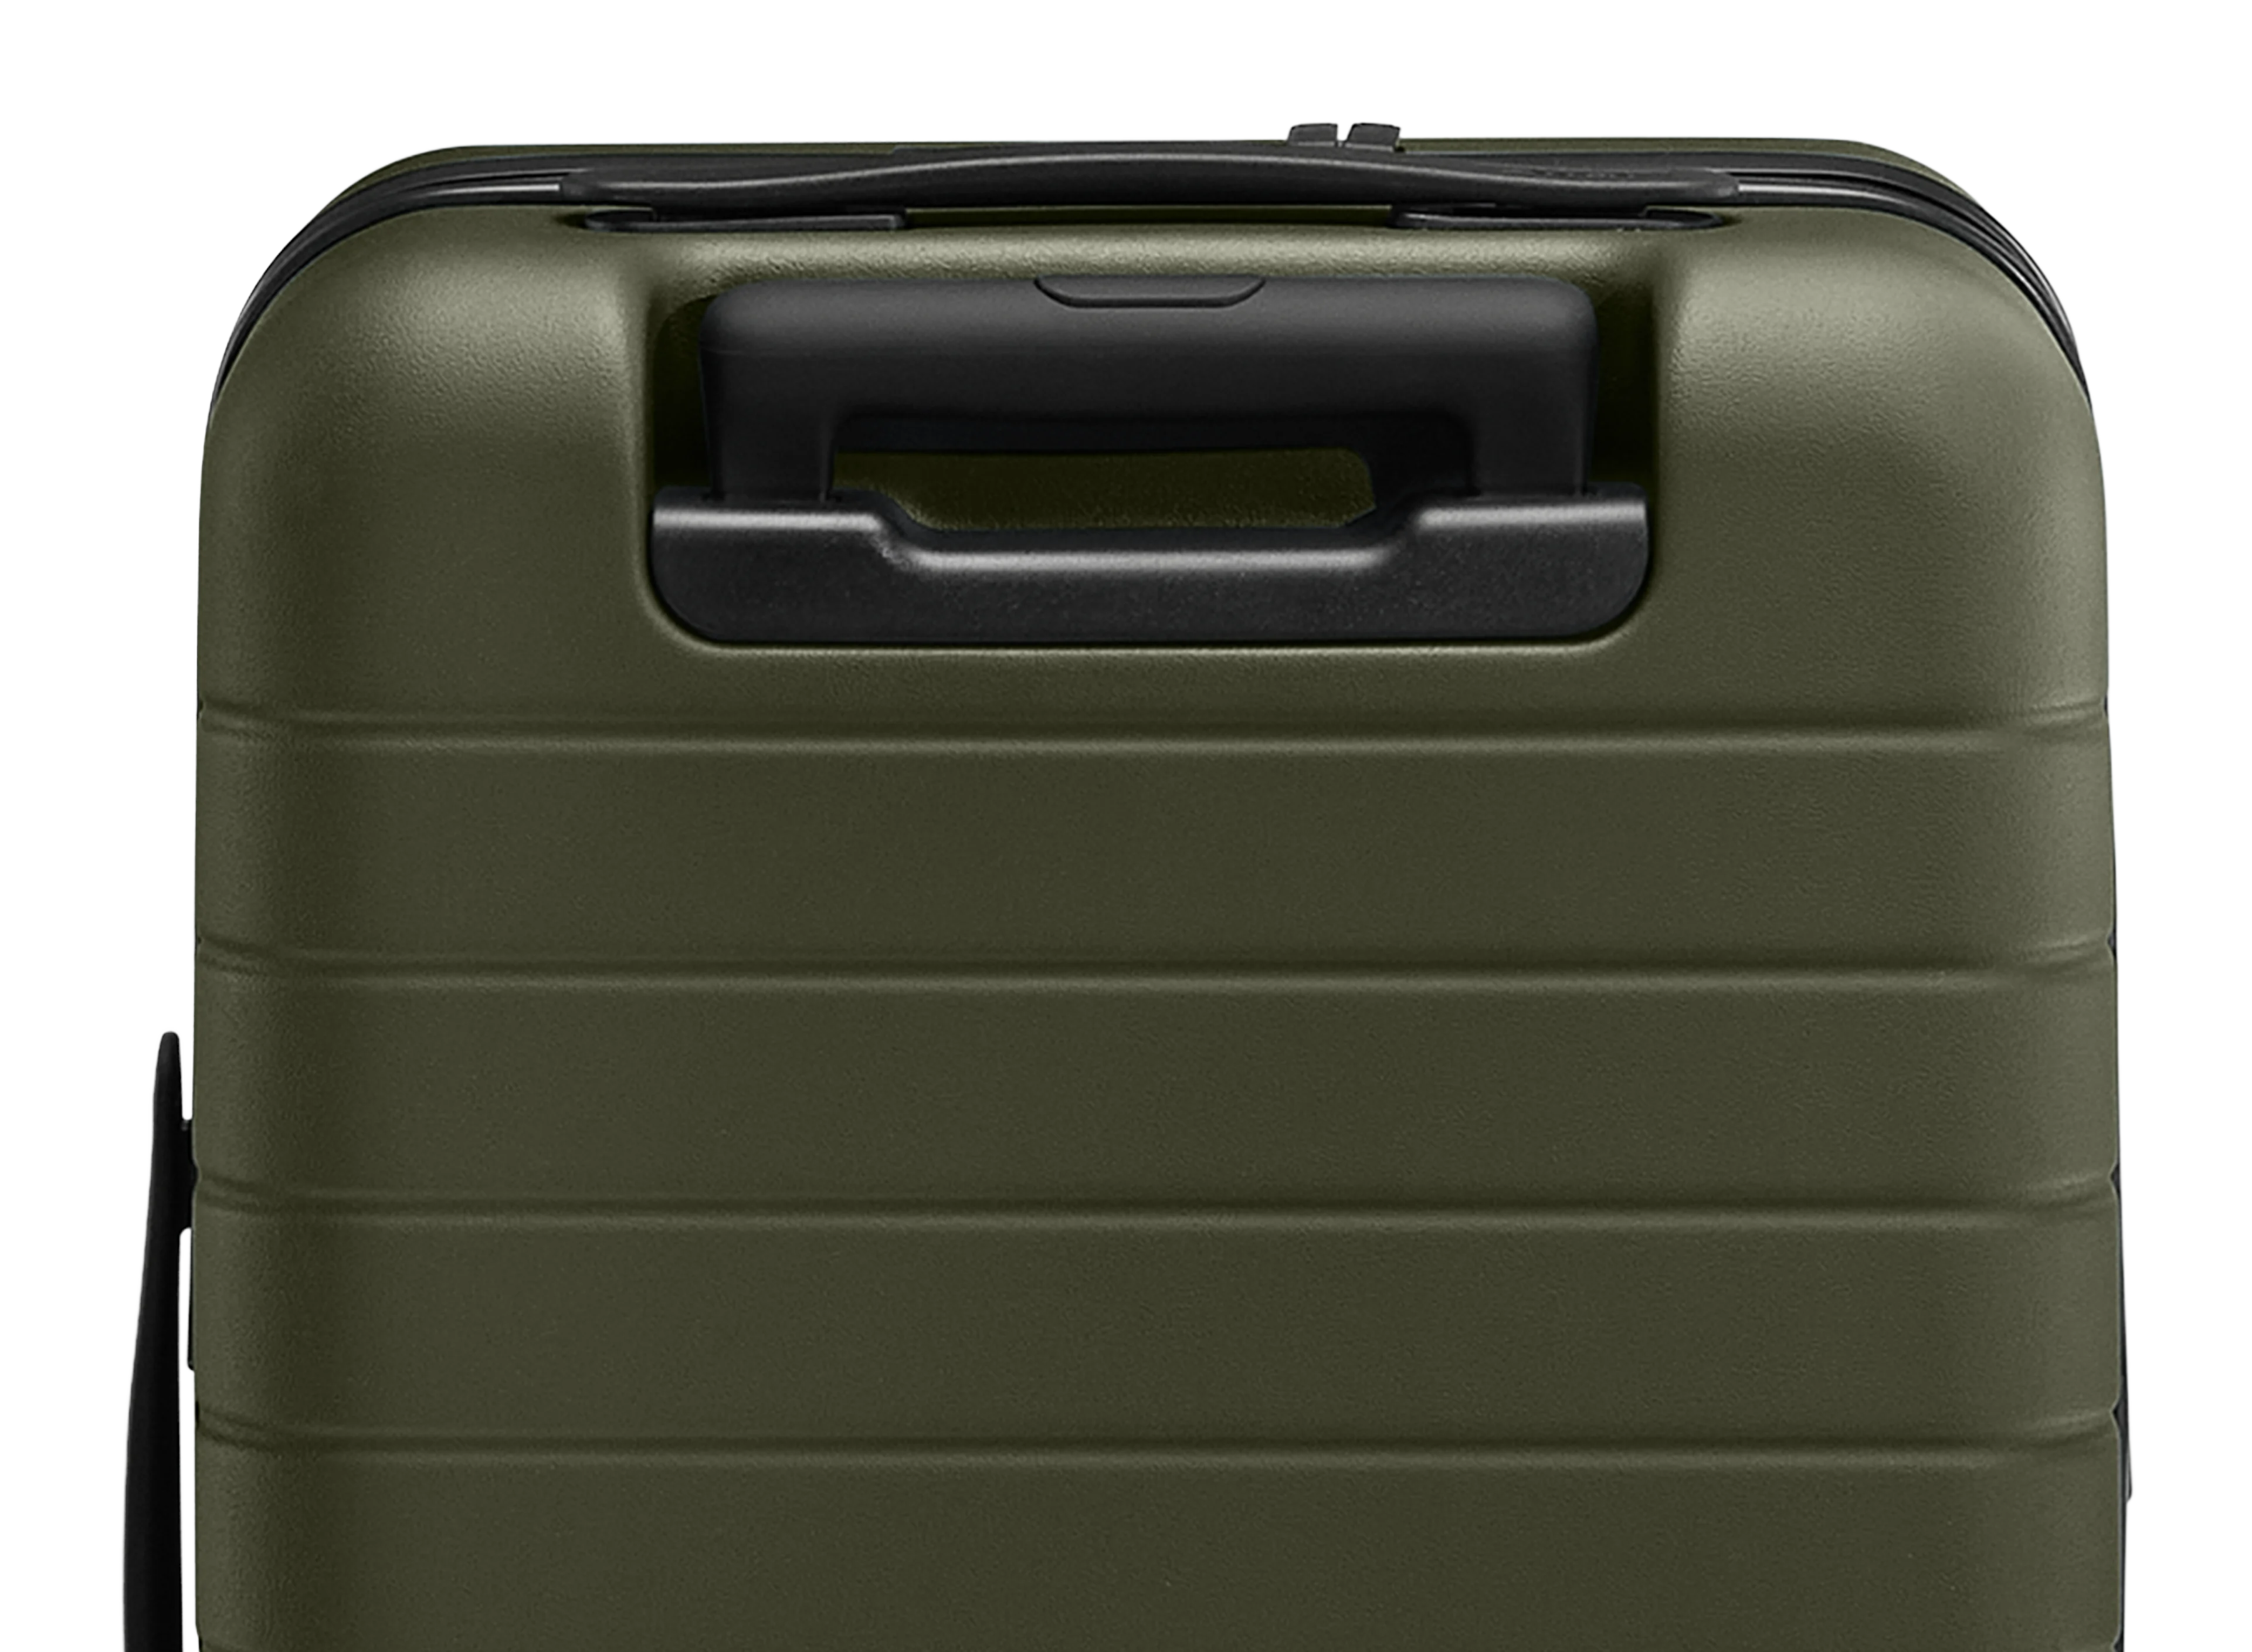 The Carry-On Flex in Olive Green